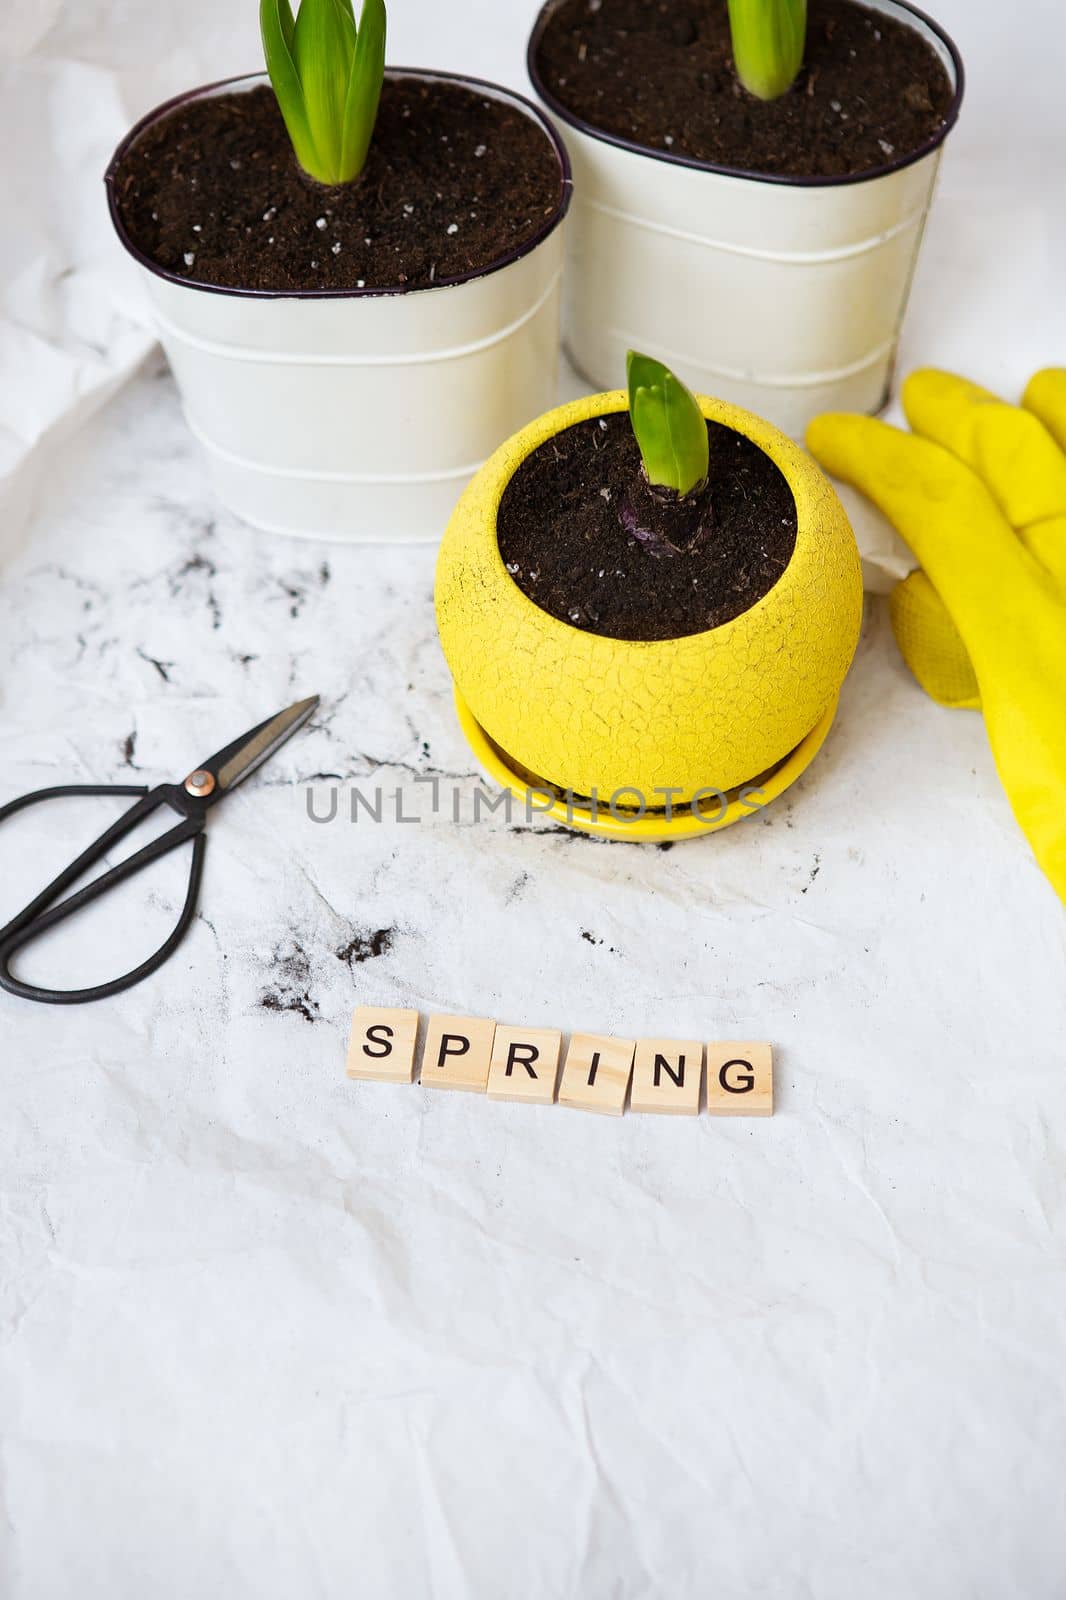 Transplanted hyacinth bulbs in new pots, against the background of gardening tools, yellow gloves. Spring lettering